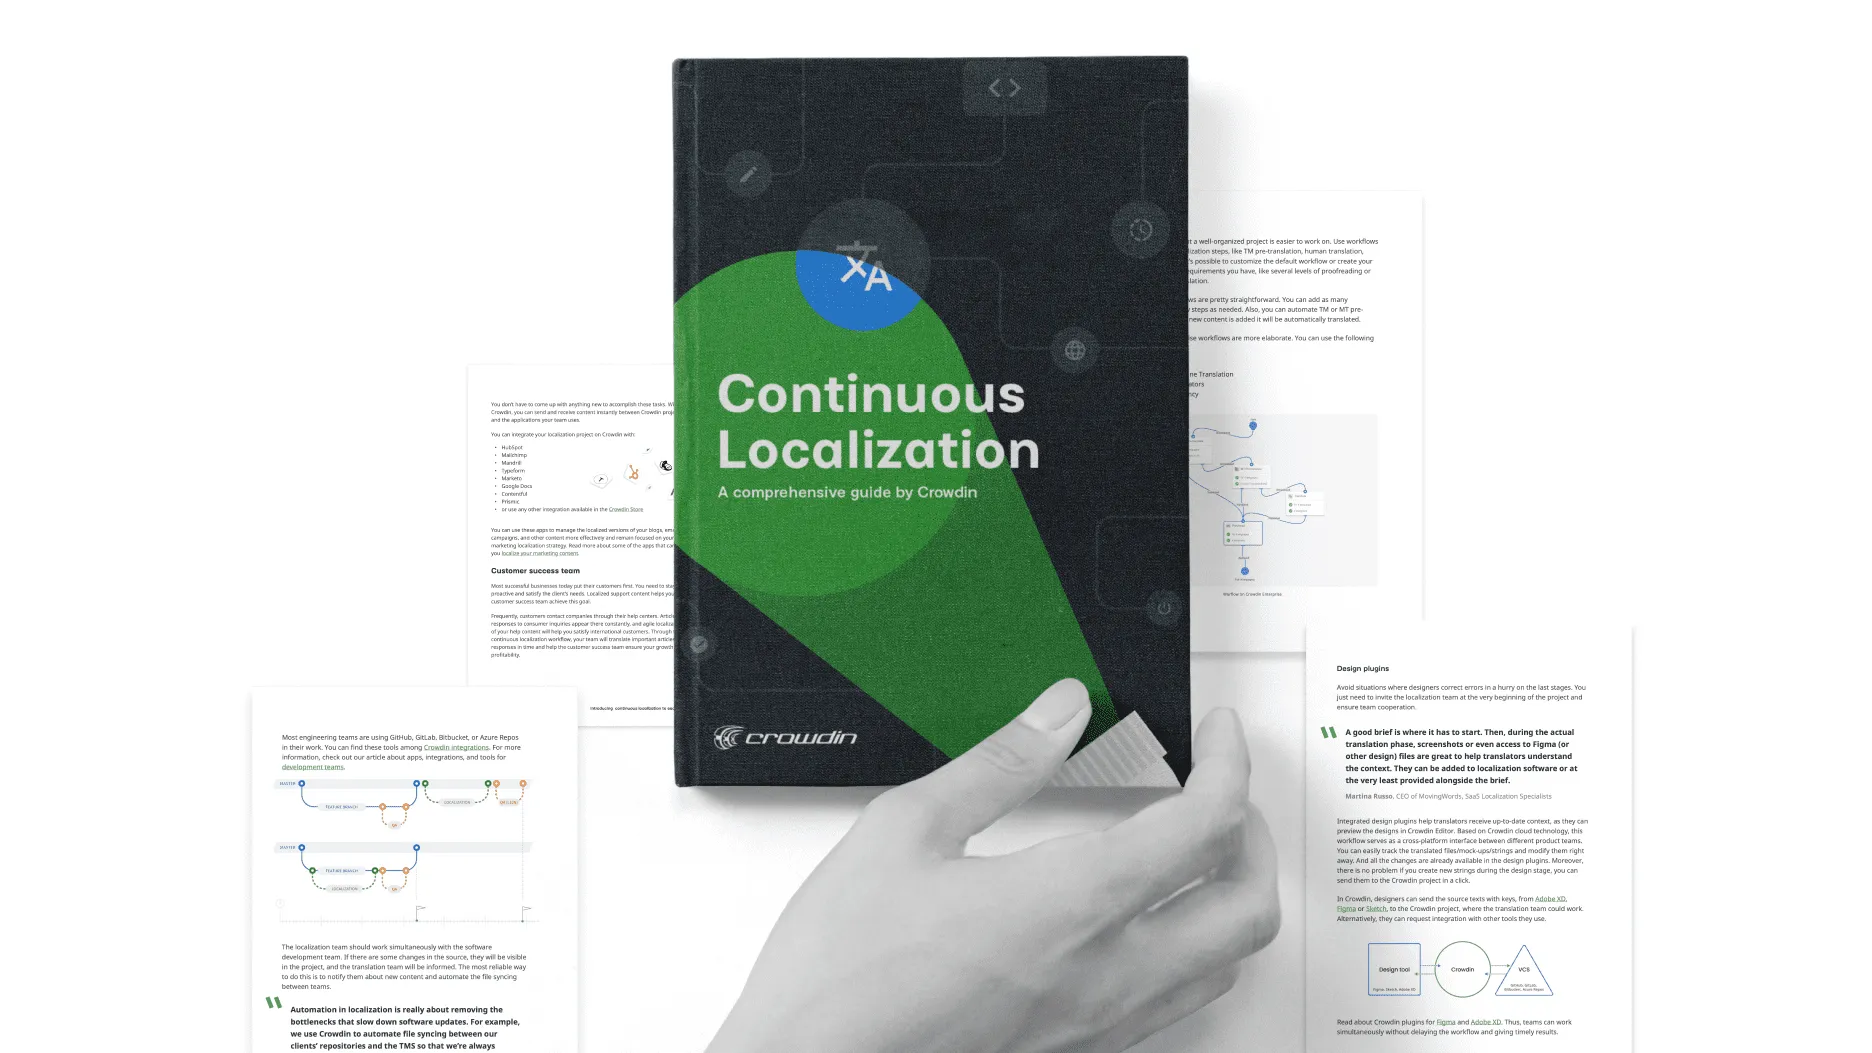 Continuous Localization: The Agility It Gives You